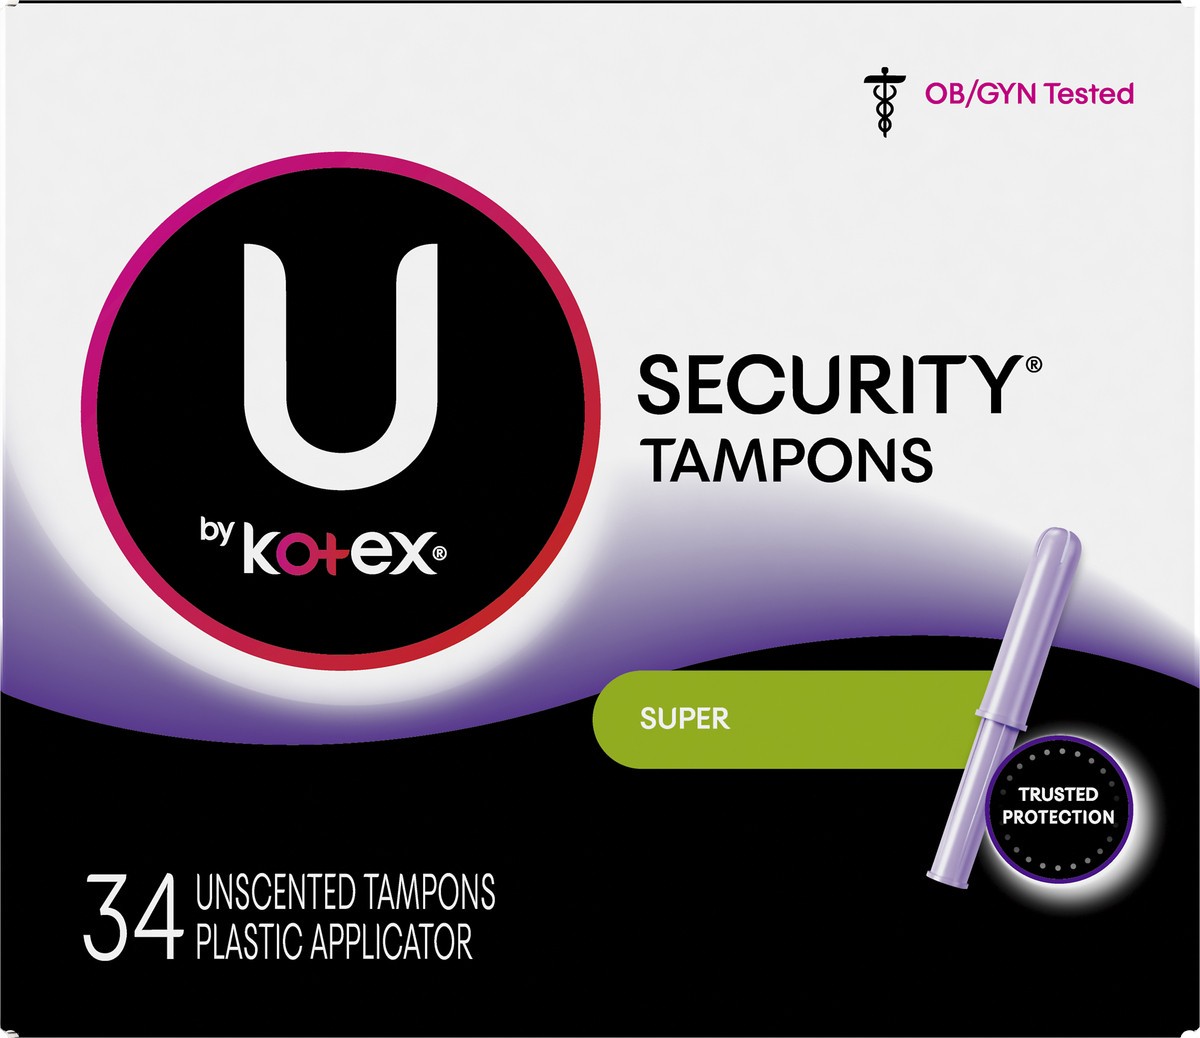 slide 7 of 8, U by Kotex Security Super Unscented Tampons, 34 ct